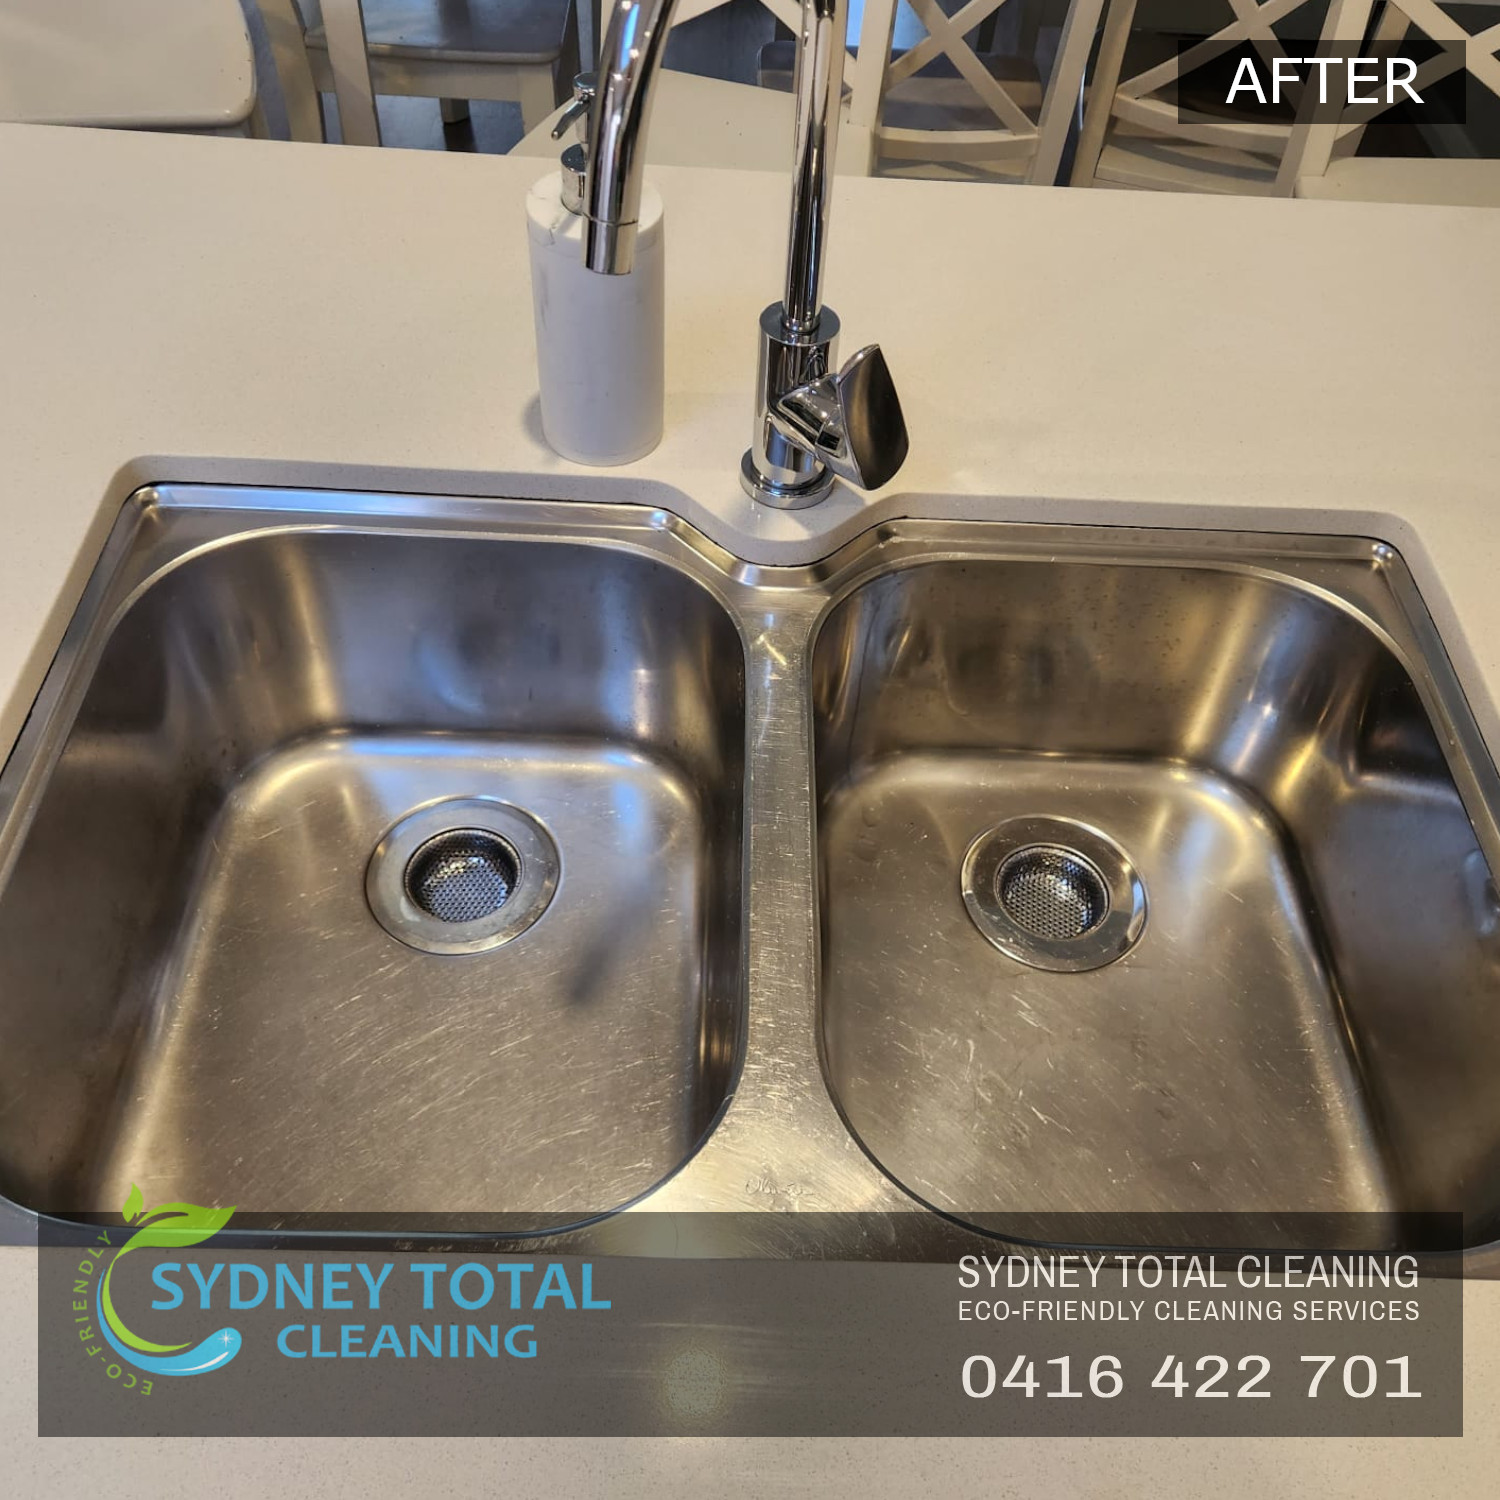 Sydney Total Cleaning